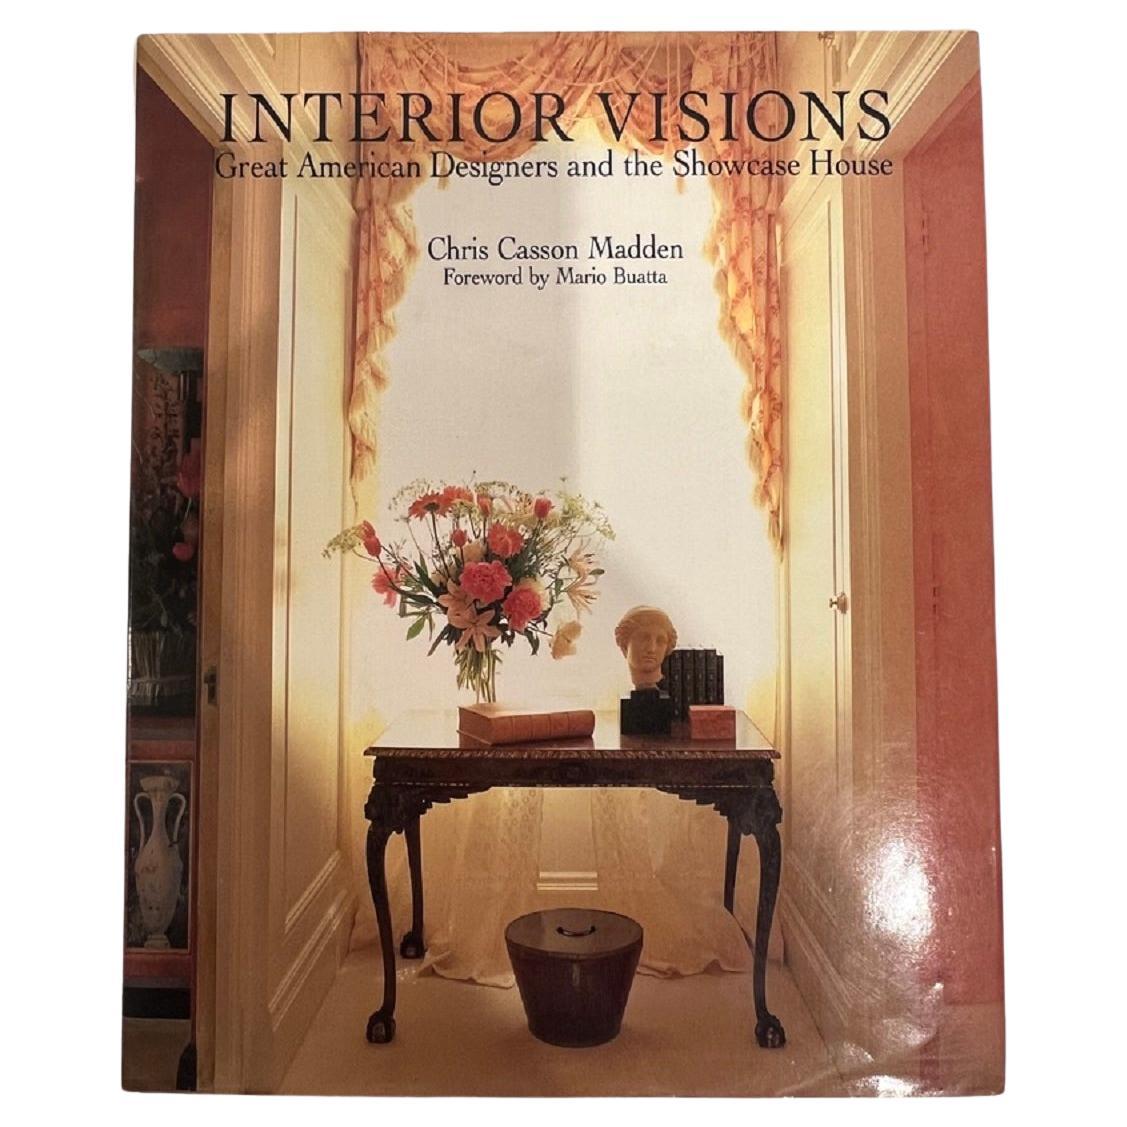 Interior Visions Great American Designers by Chris Casson Madden Hardcover 1988